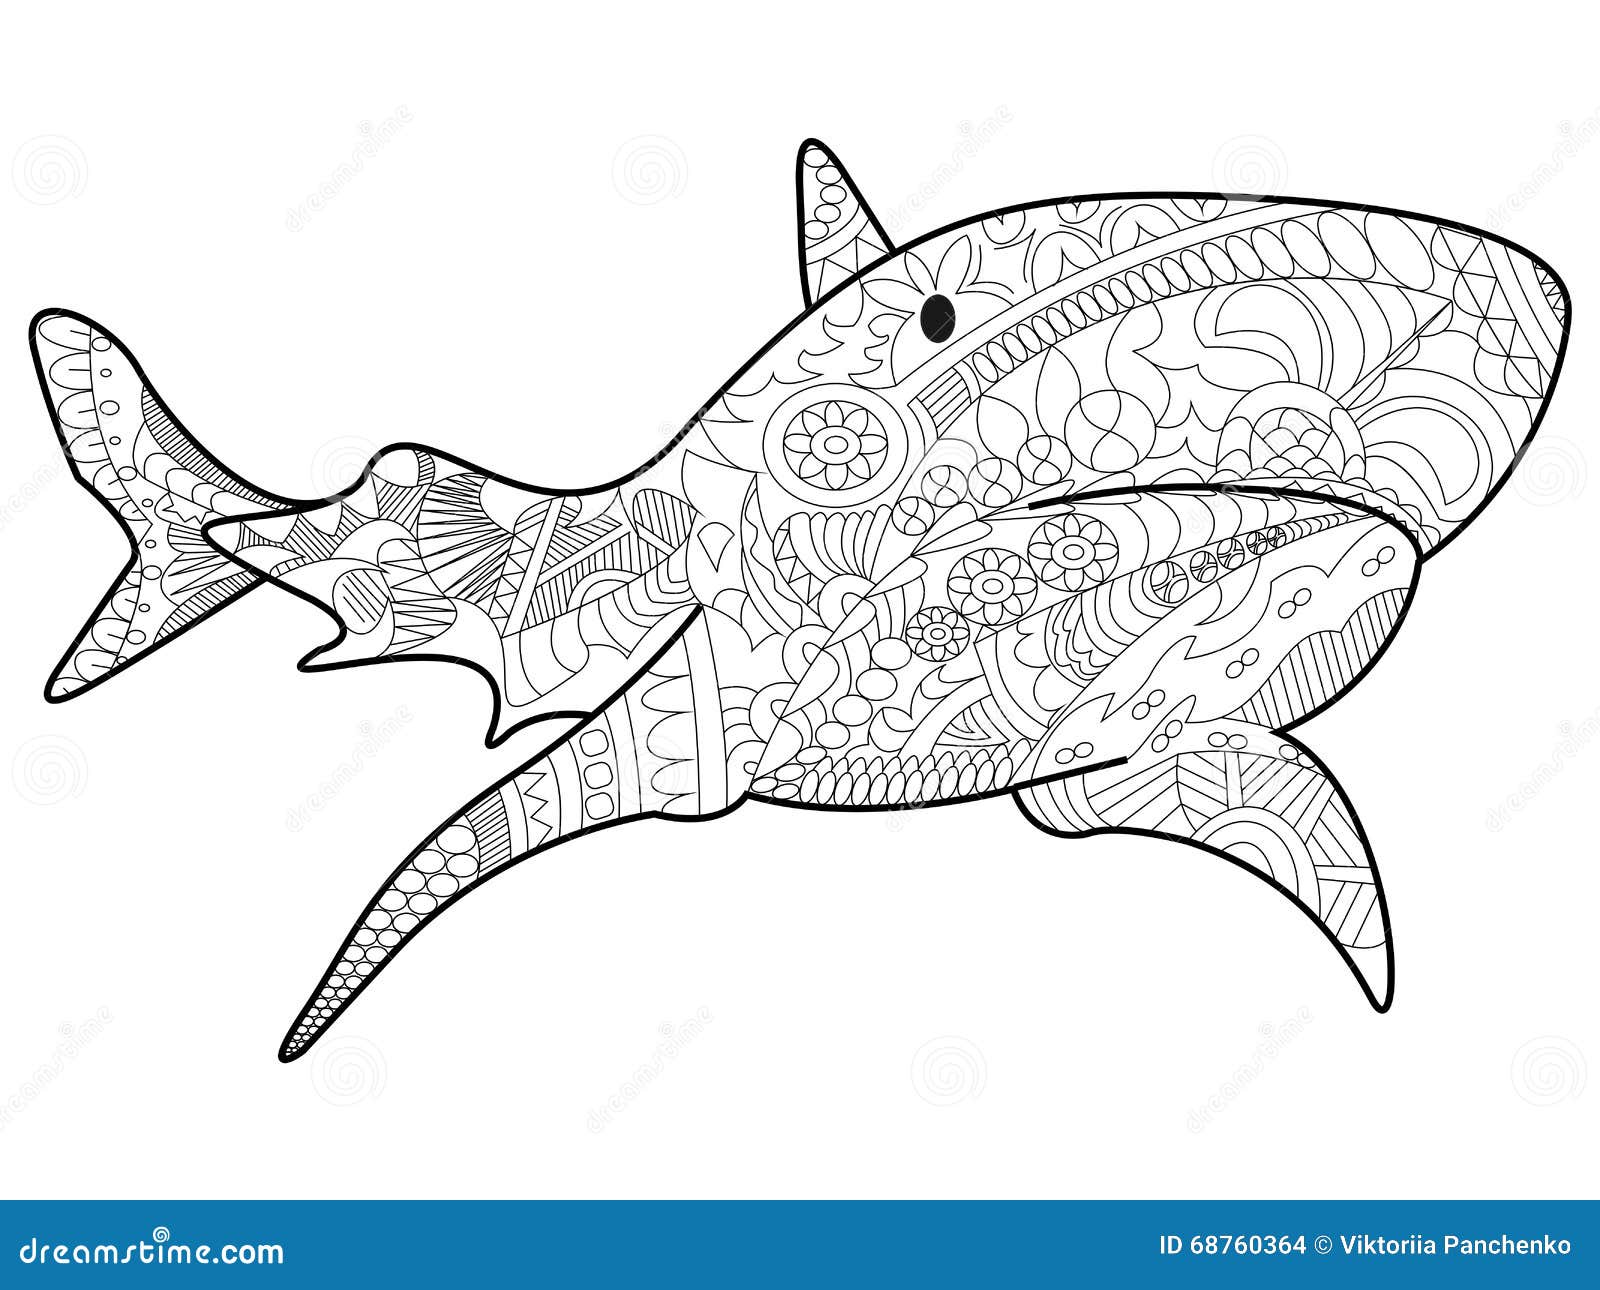 Shark coloring vector for adults stock vector